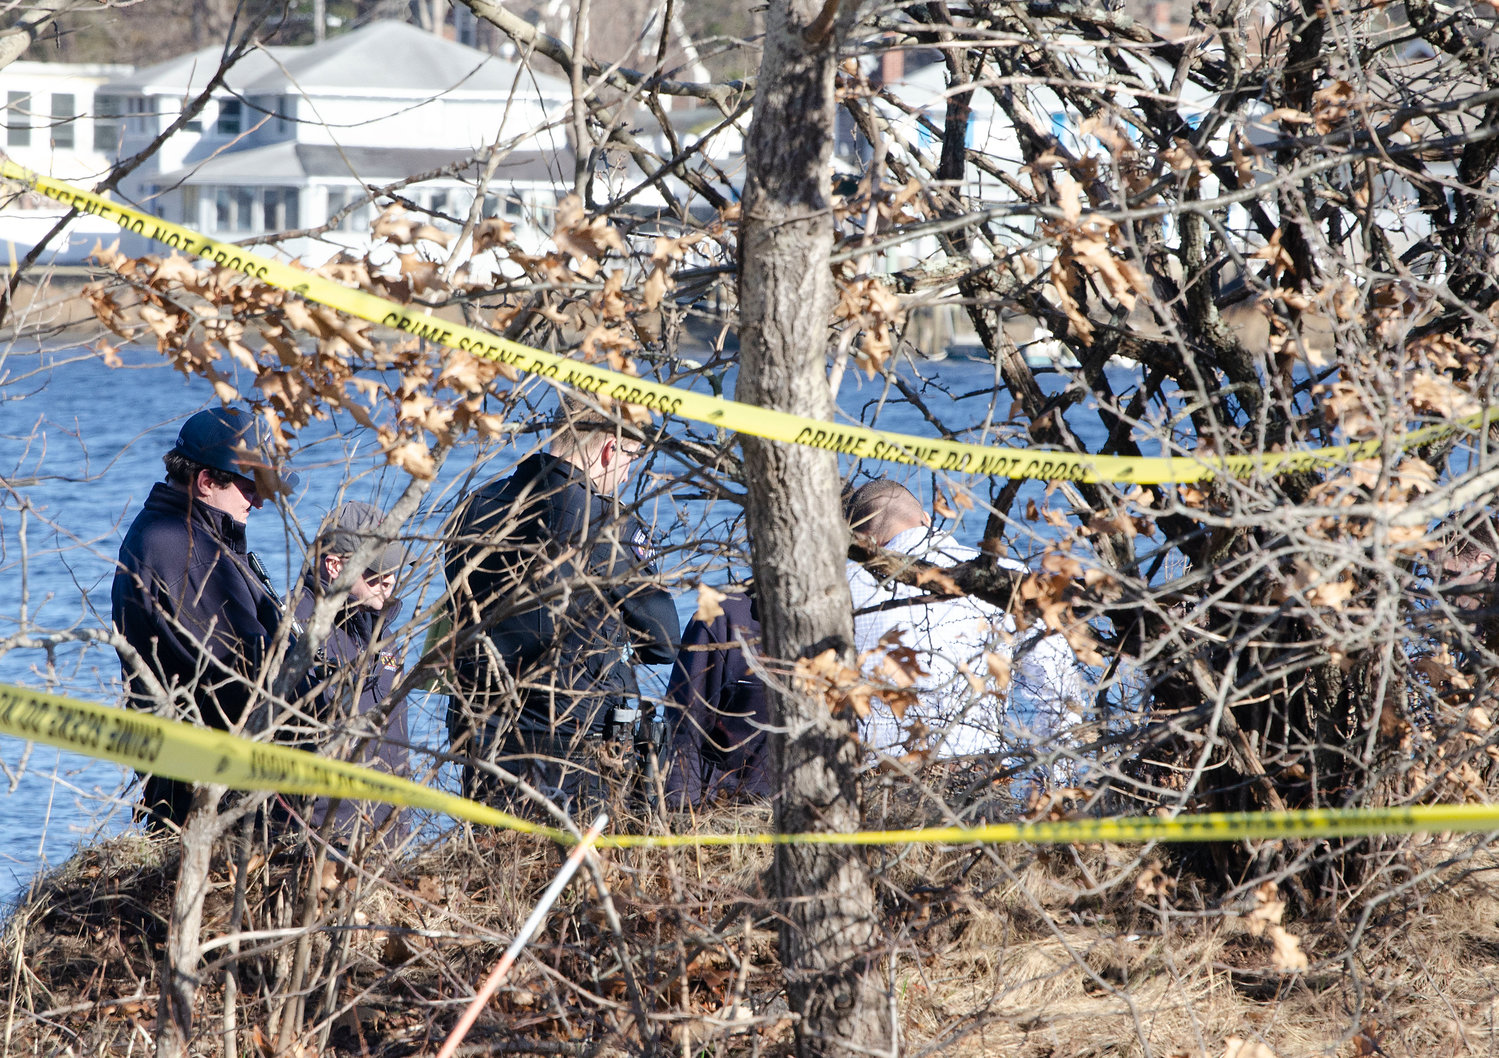 Barrington Police, firemen and medical examiners look over the scene where a body was discovered on Wednesday afternoon.